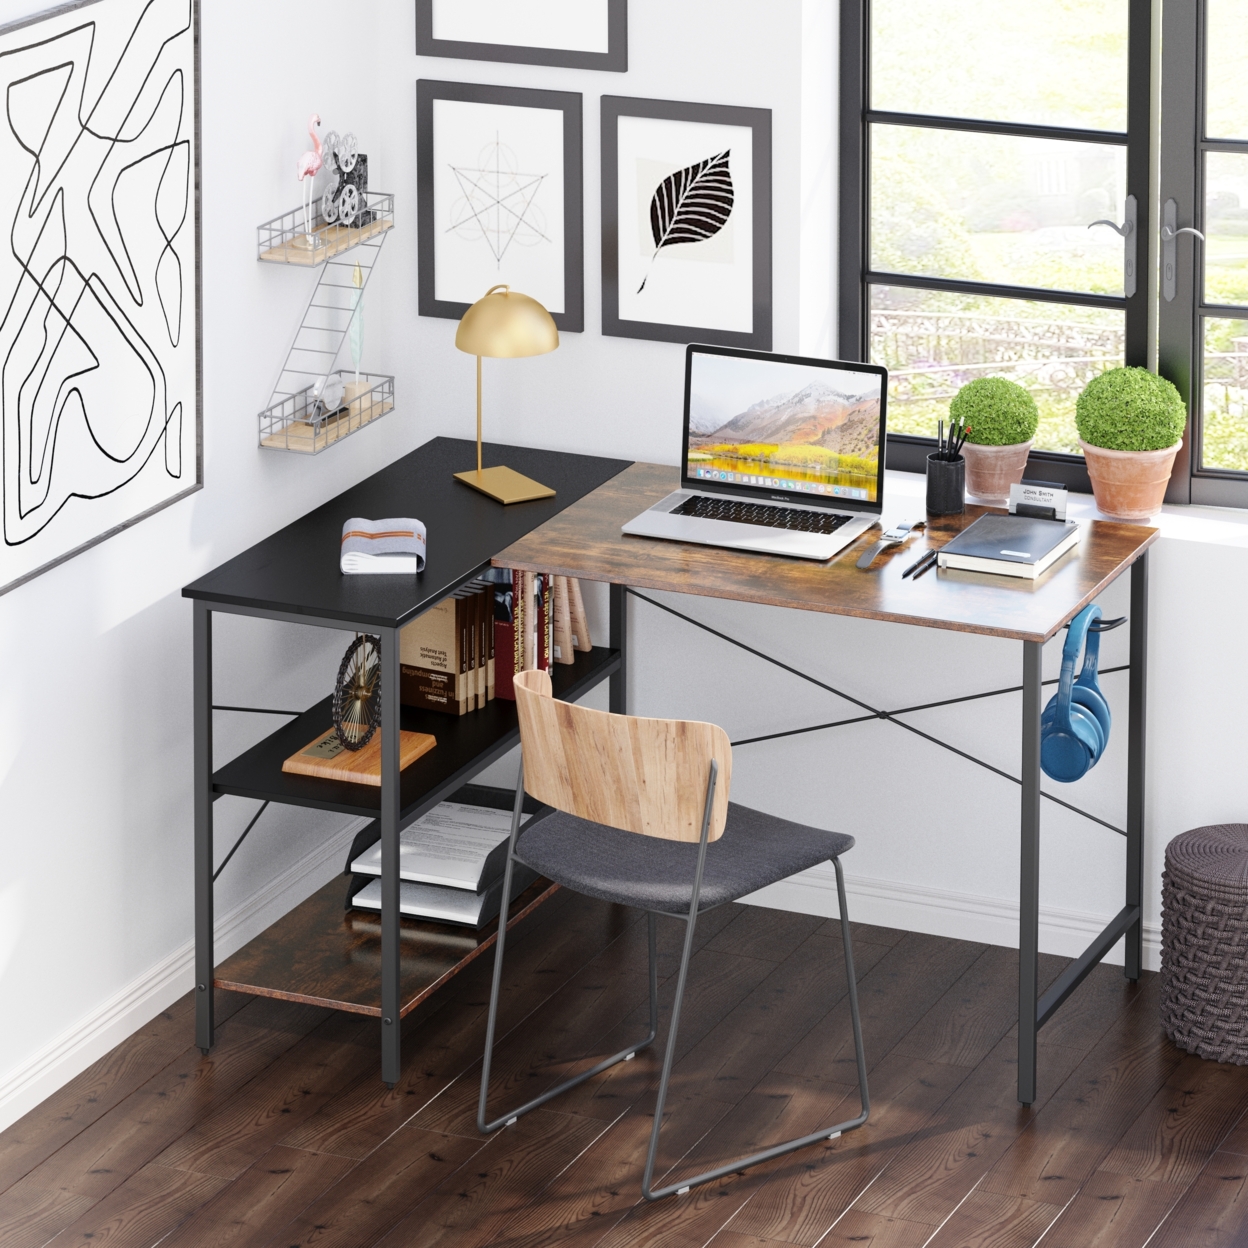 (West America Express shipping warehouseï¿½ï¿½two days to deliver goods)L-shaped black linen + retro double color matching desk